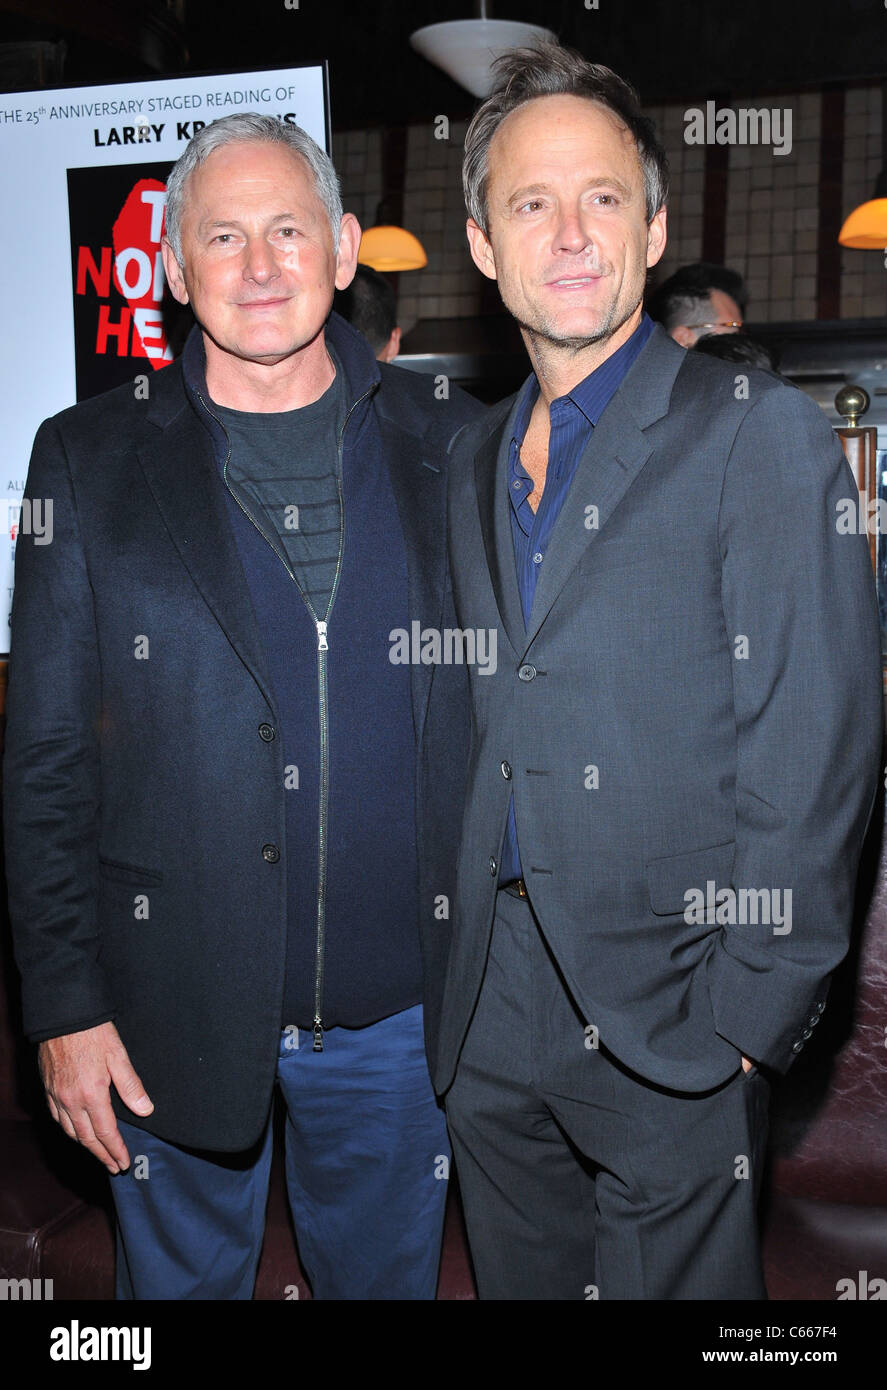 Victor Garber, Josh Benjamin Hickey in attendance for The 25th Anniversary Staged Reading of THE NORMAL HEART After Party, Bond Stock Photo